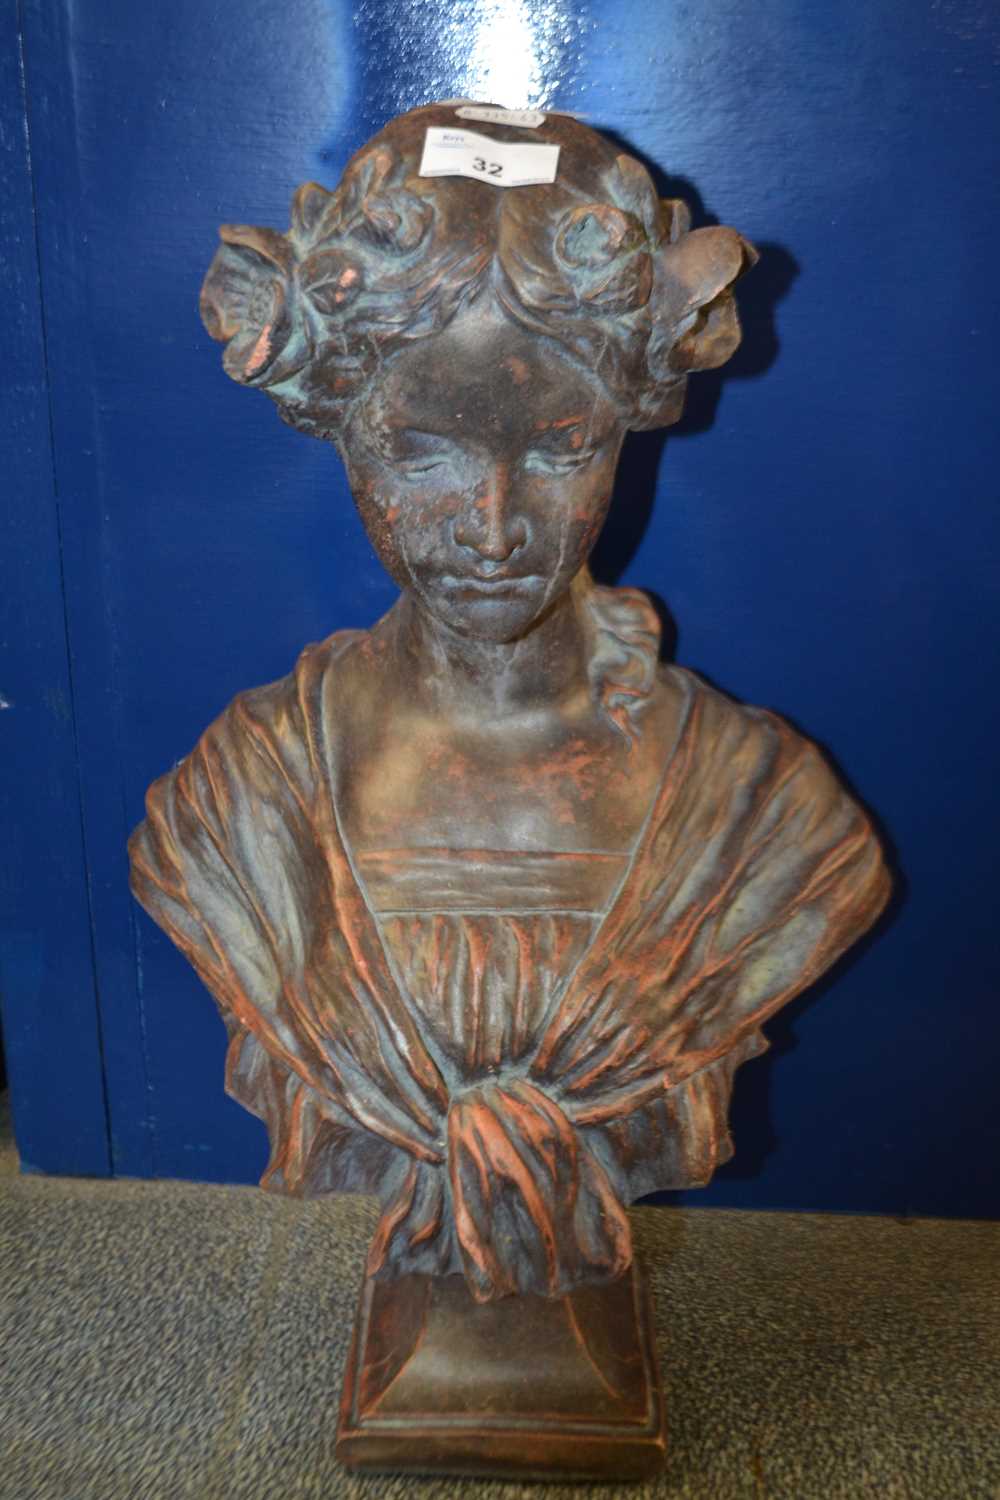 Terracotta head and shoulders bust of a young lady set on plinth base, unsigned